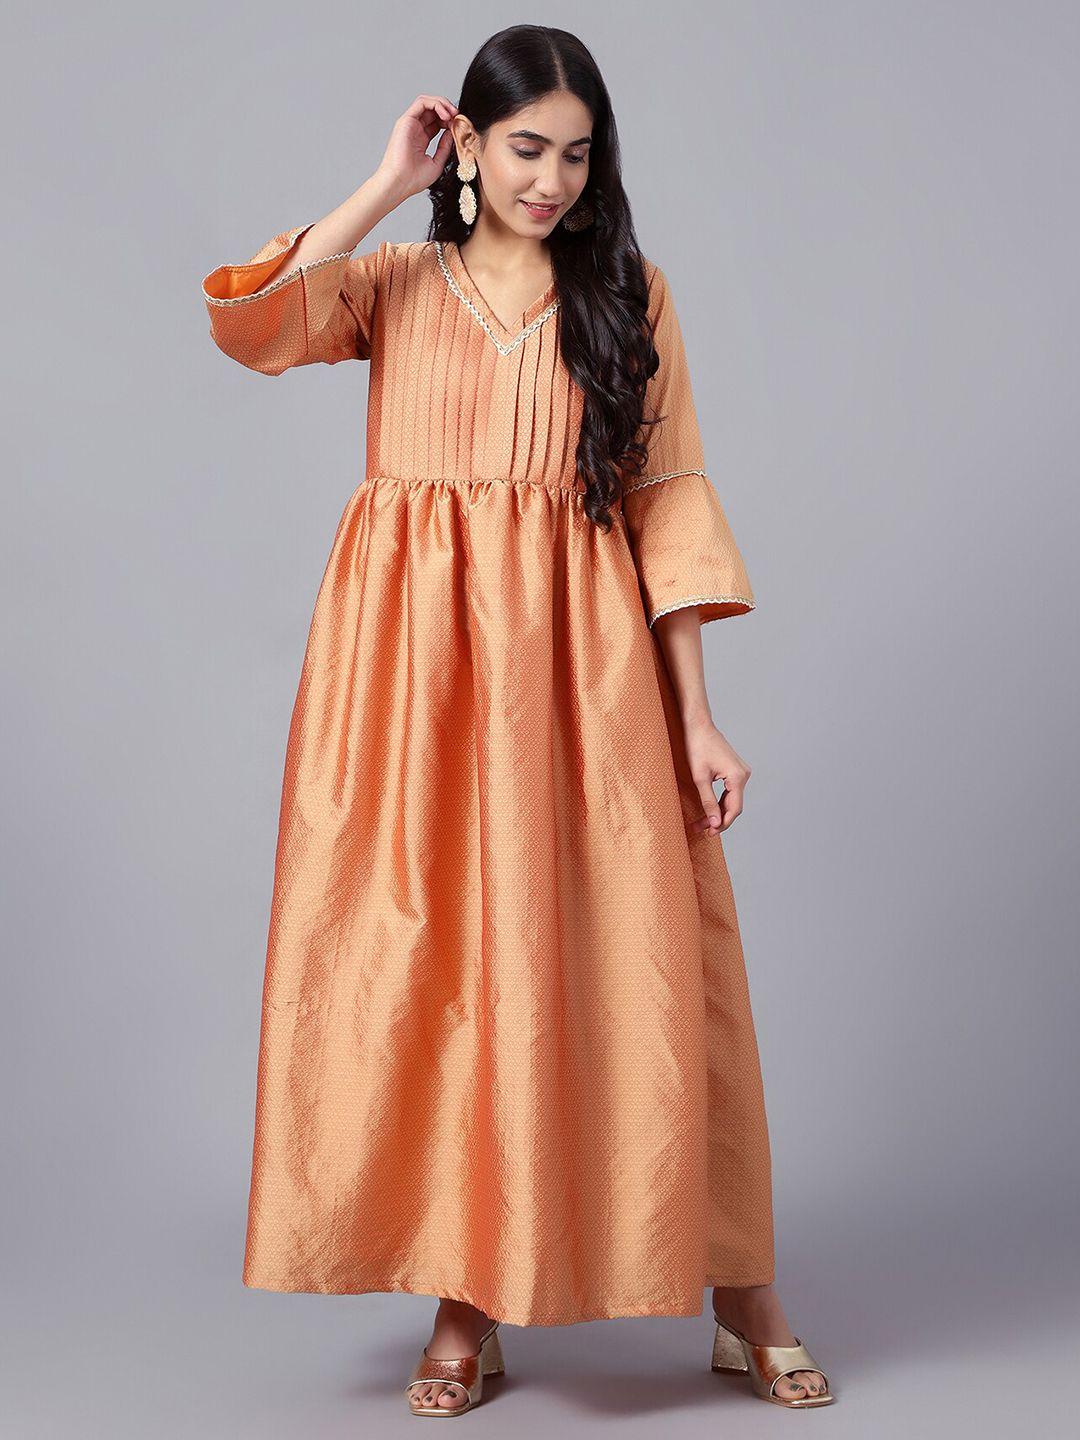 v tradition ethnic bell sleeves maxi fit & flare dress